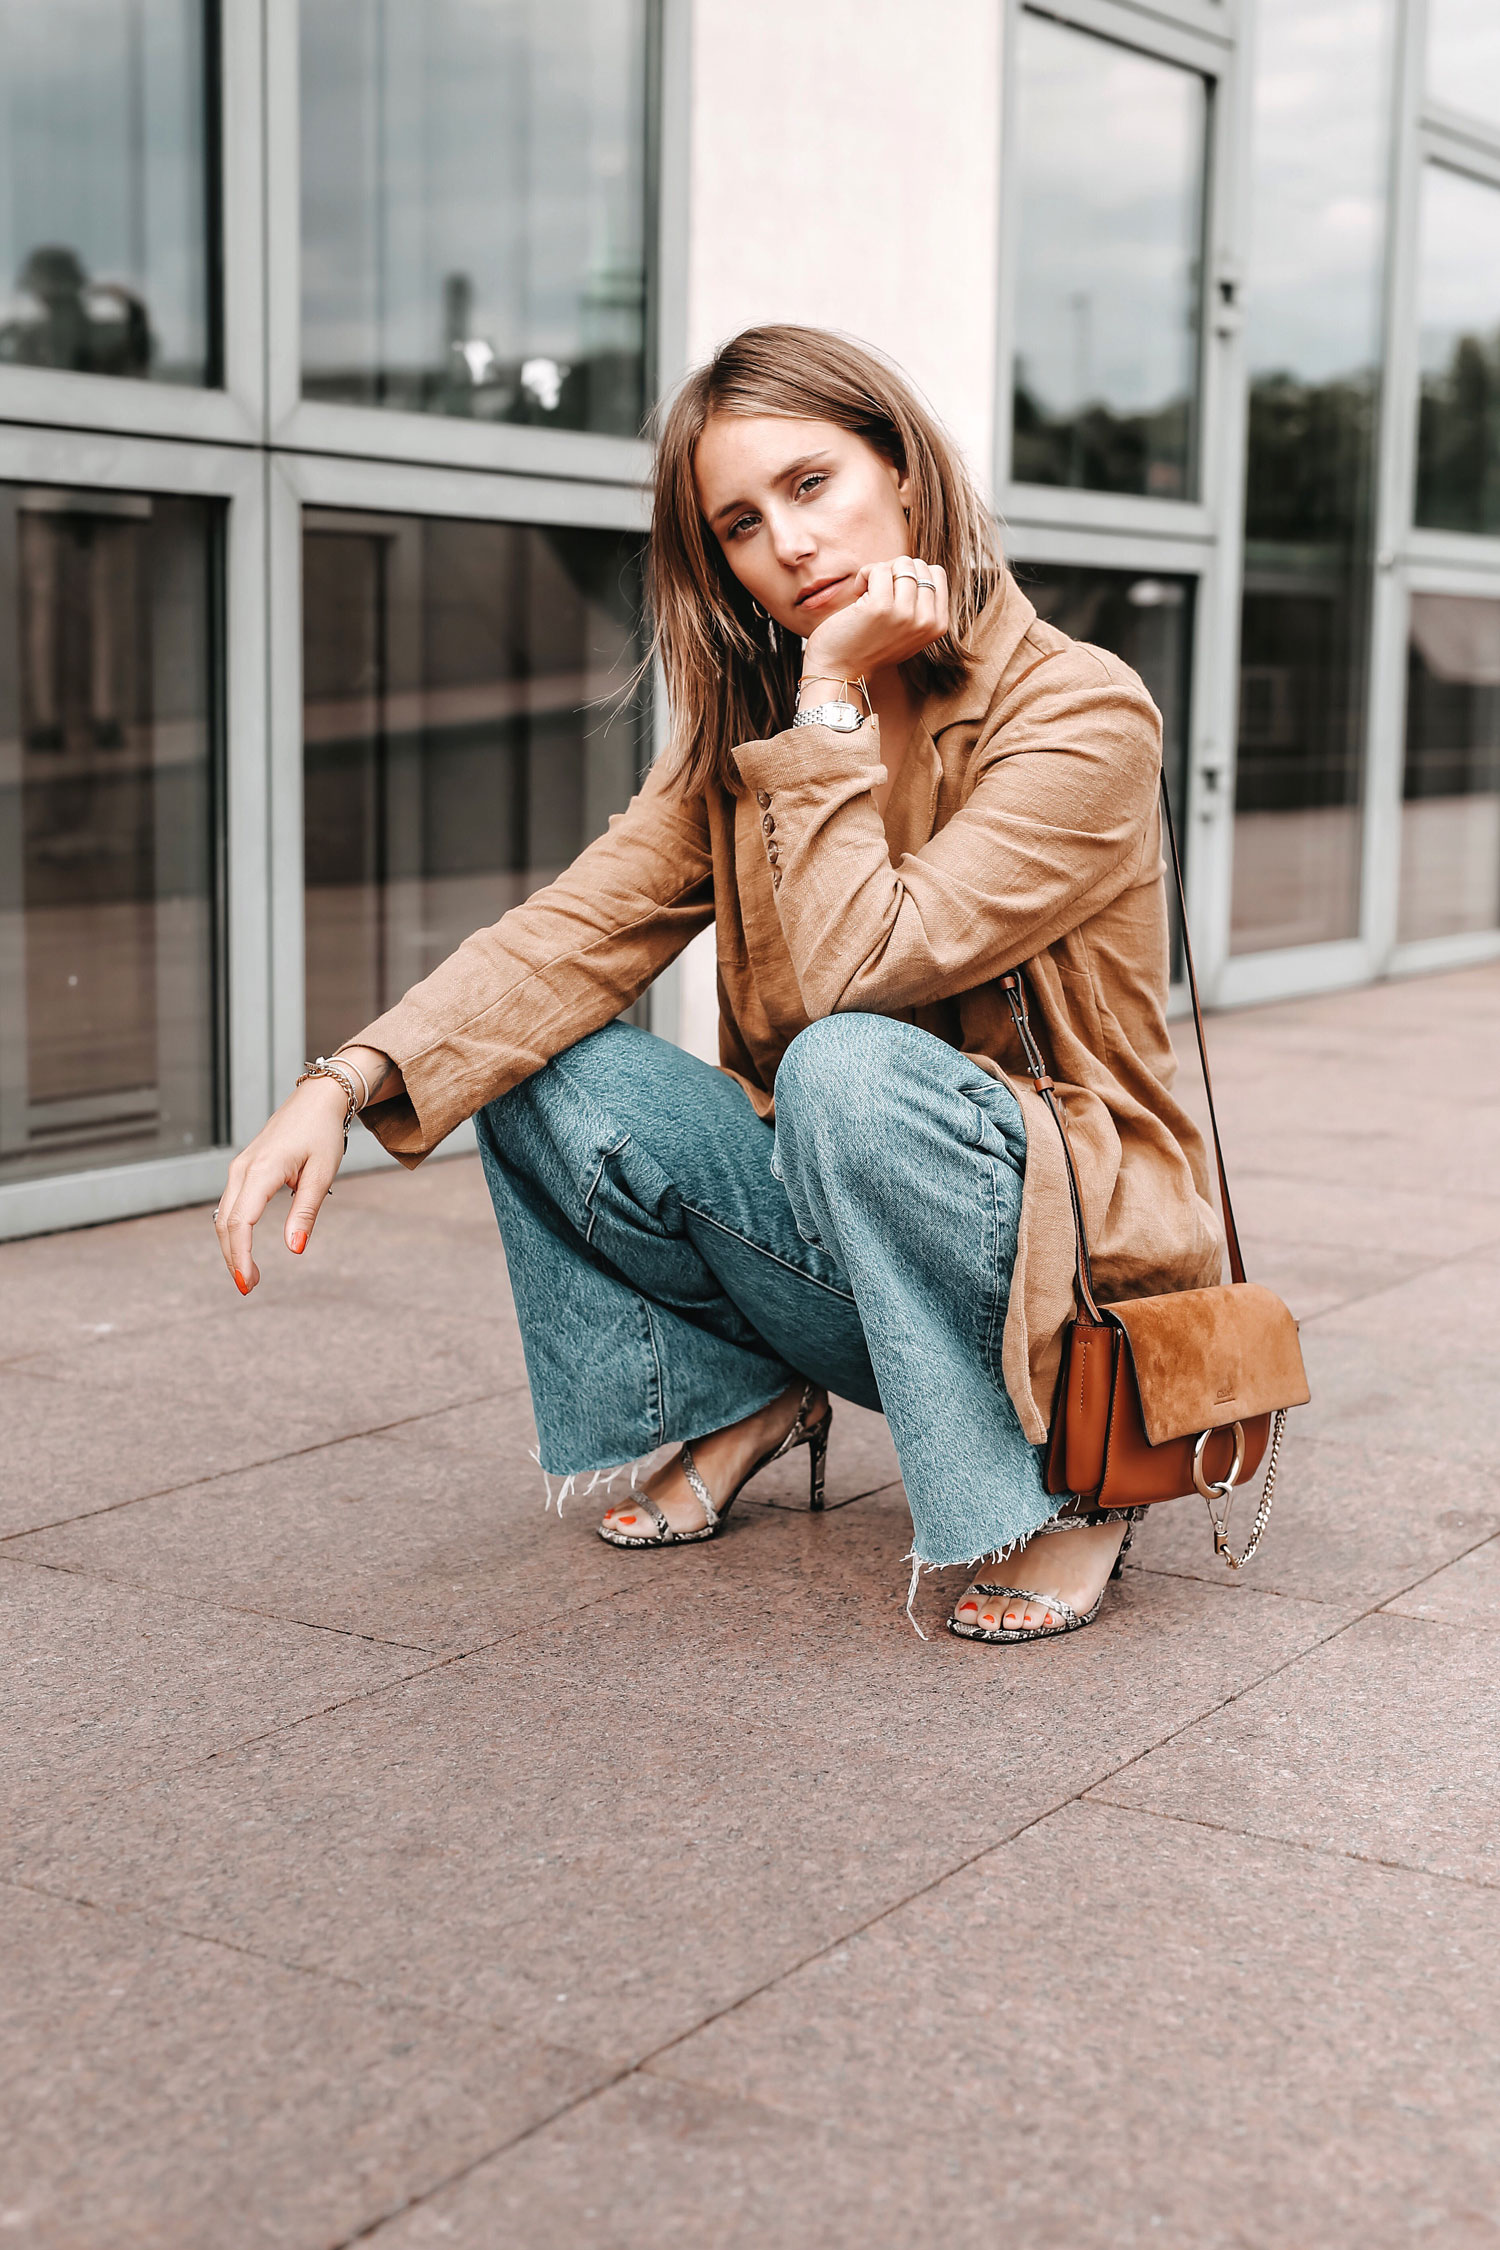 Styleguide: 3 Outfit ideas for the trendy Wide Leg Jeans